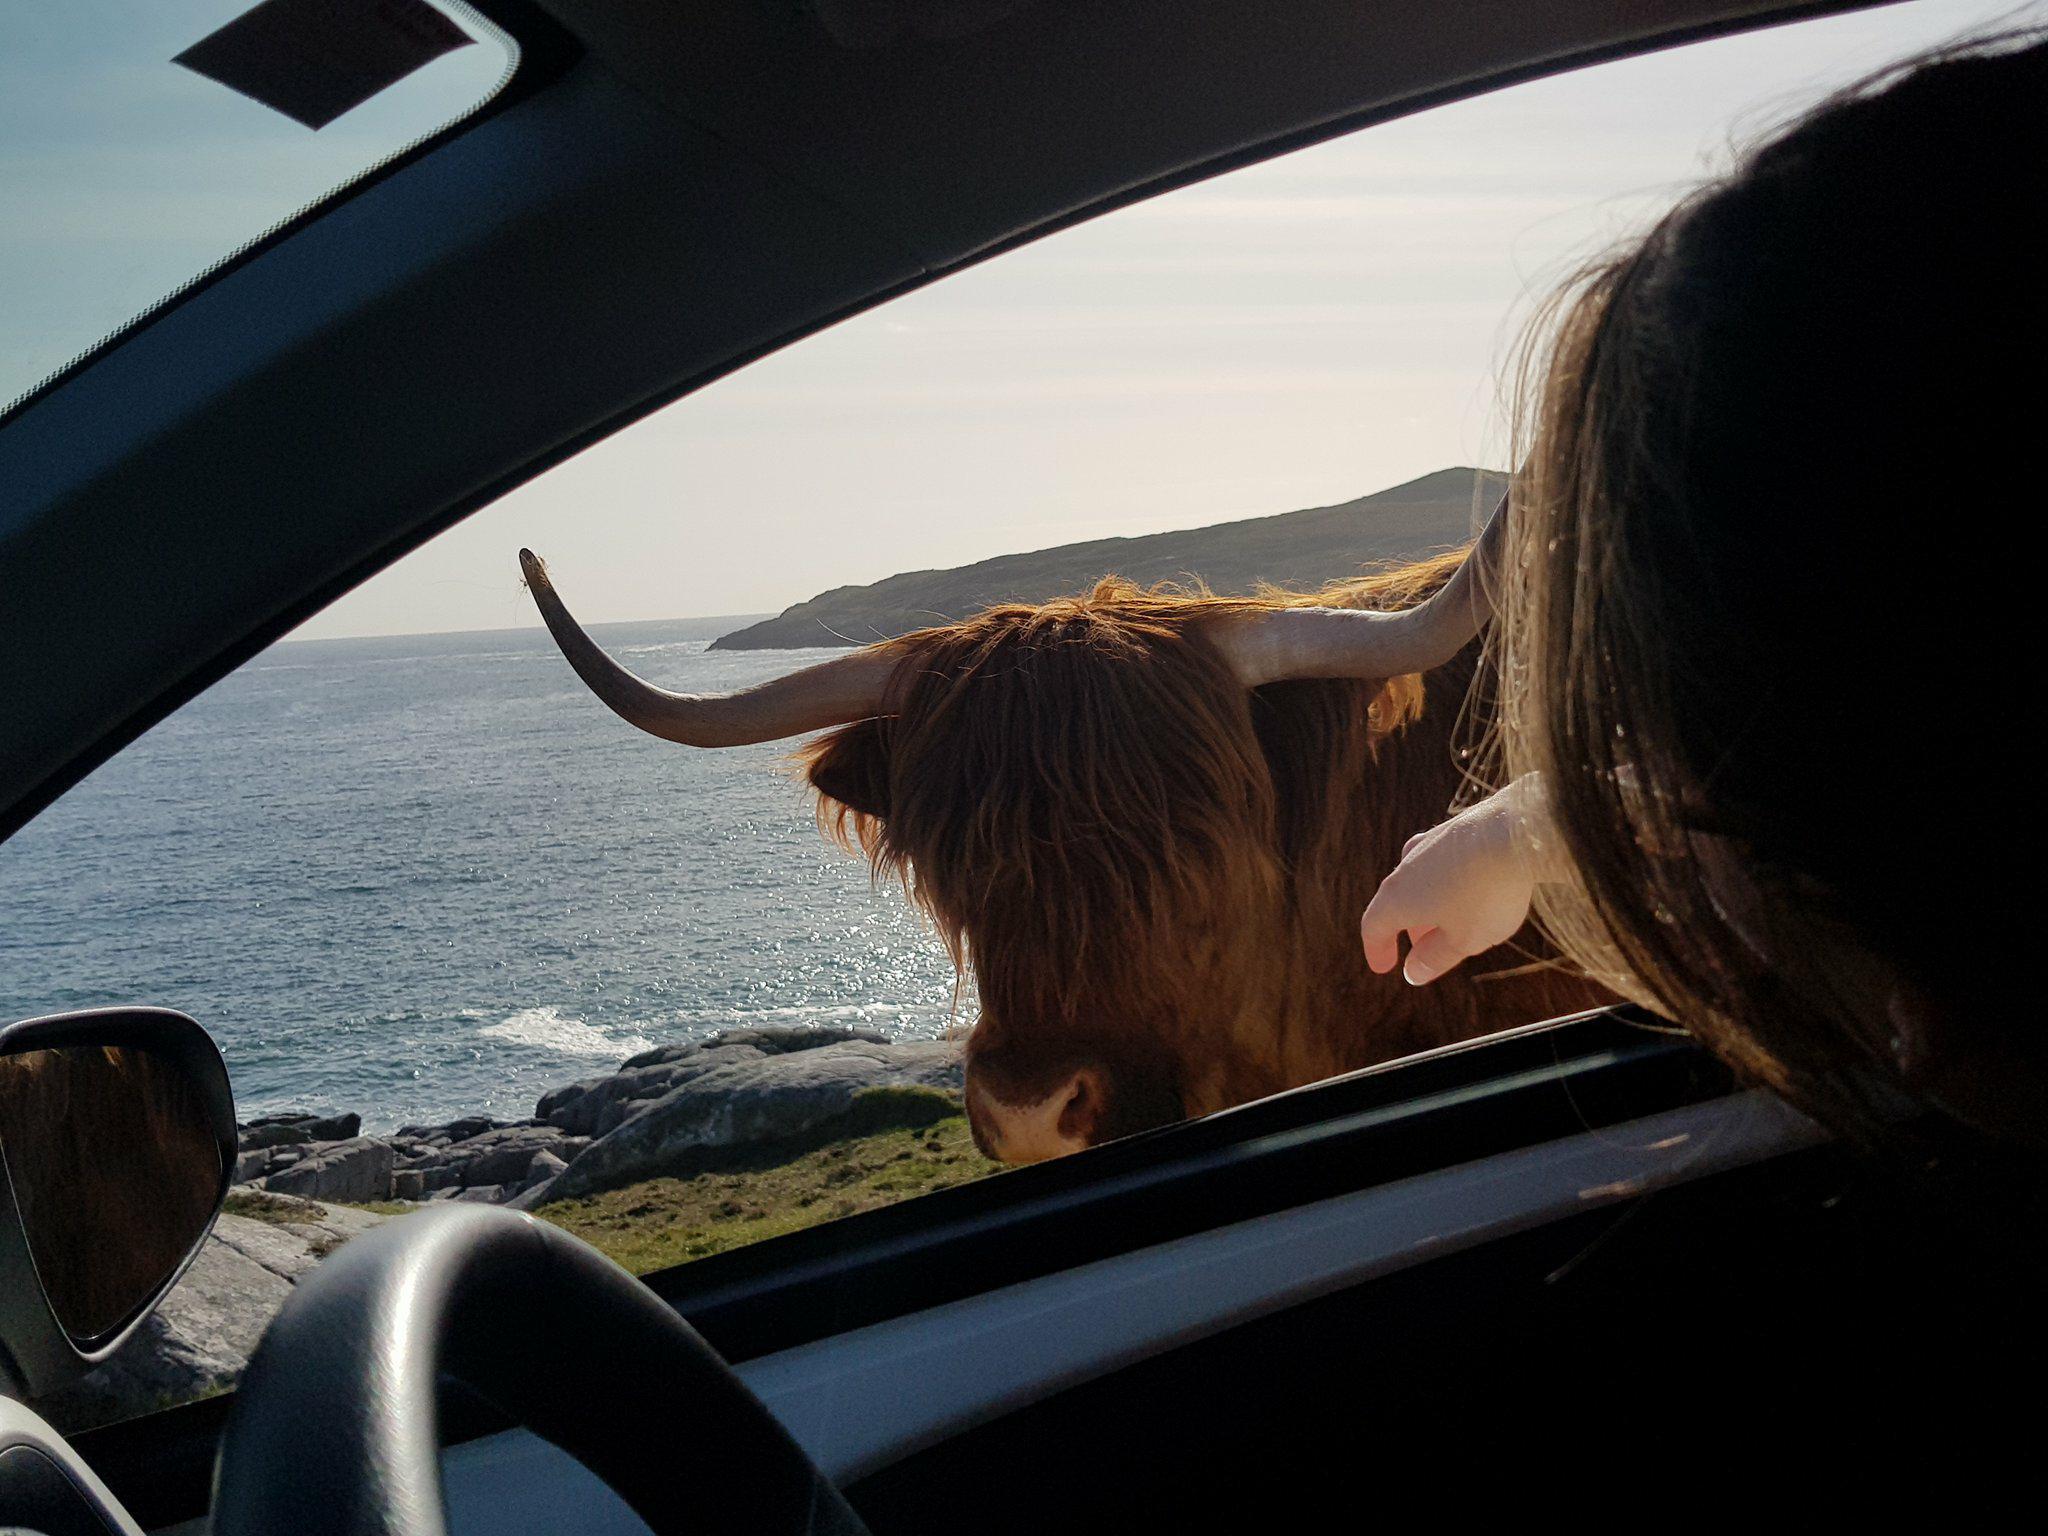 This Highland cow refused to move off the road in Isle of Harris.